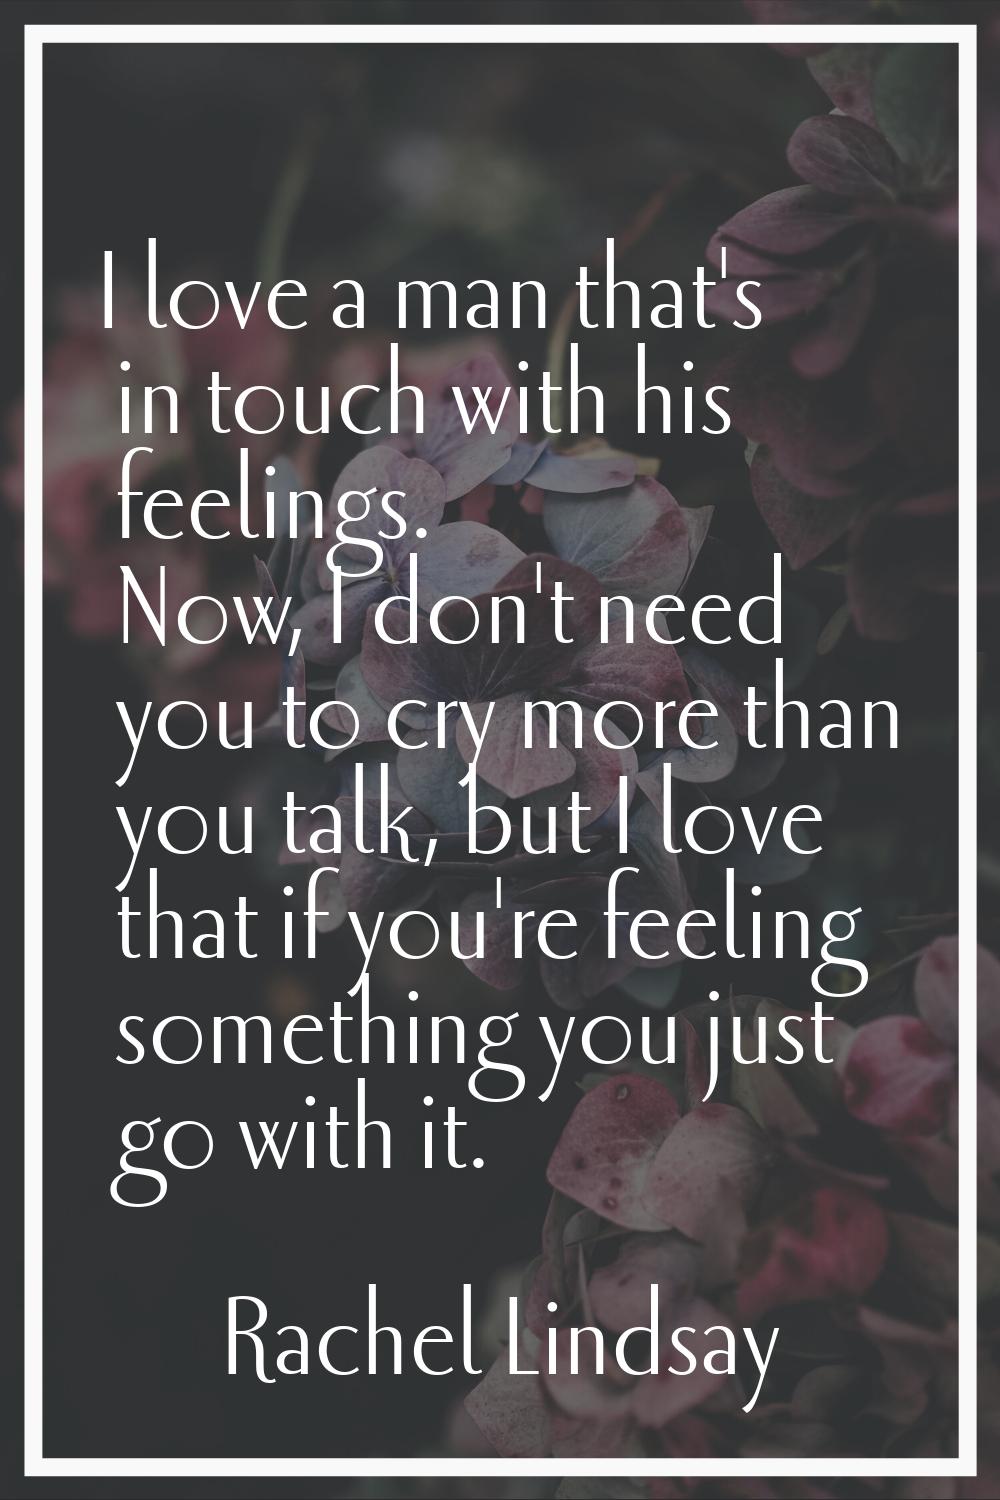 I love a man that's in touch with his feelings. Now, I don't need you to cry more than you talk, bu